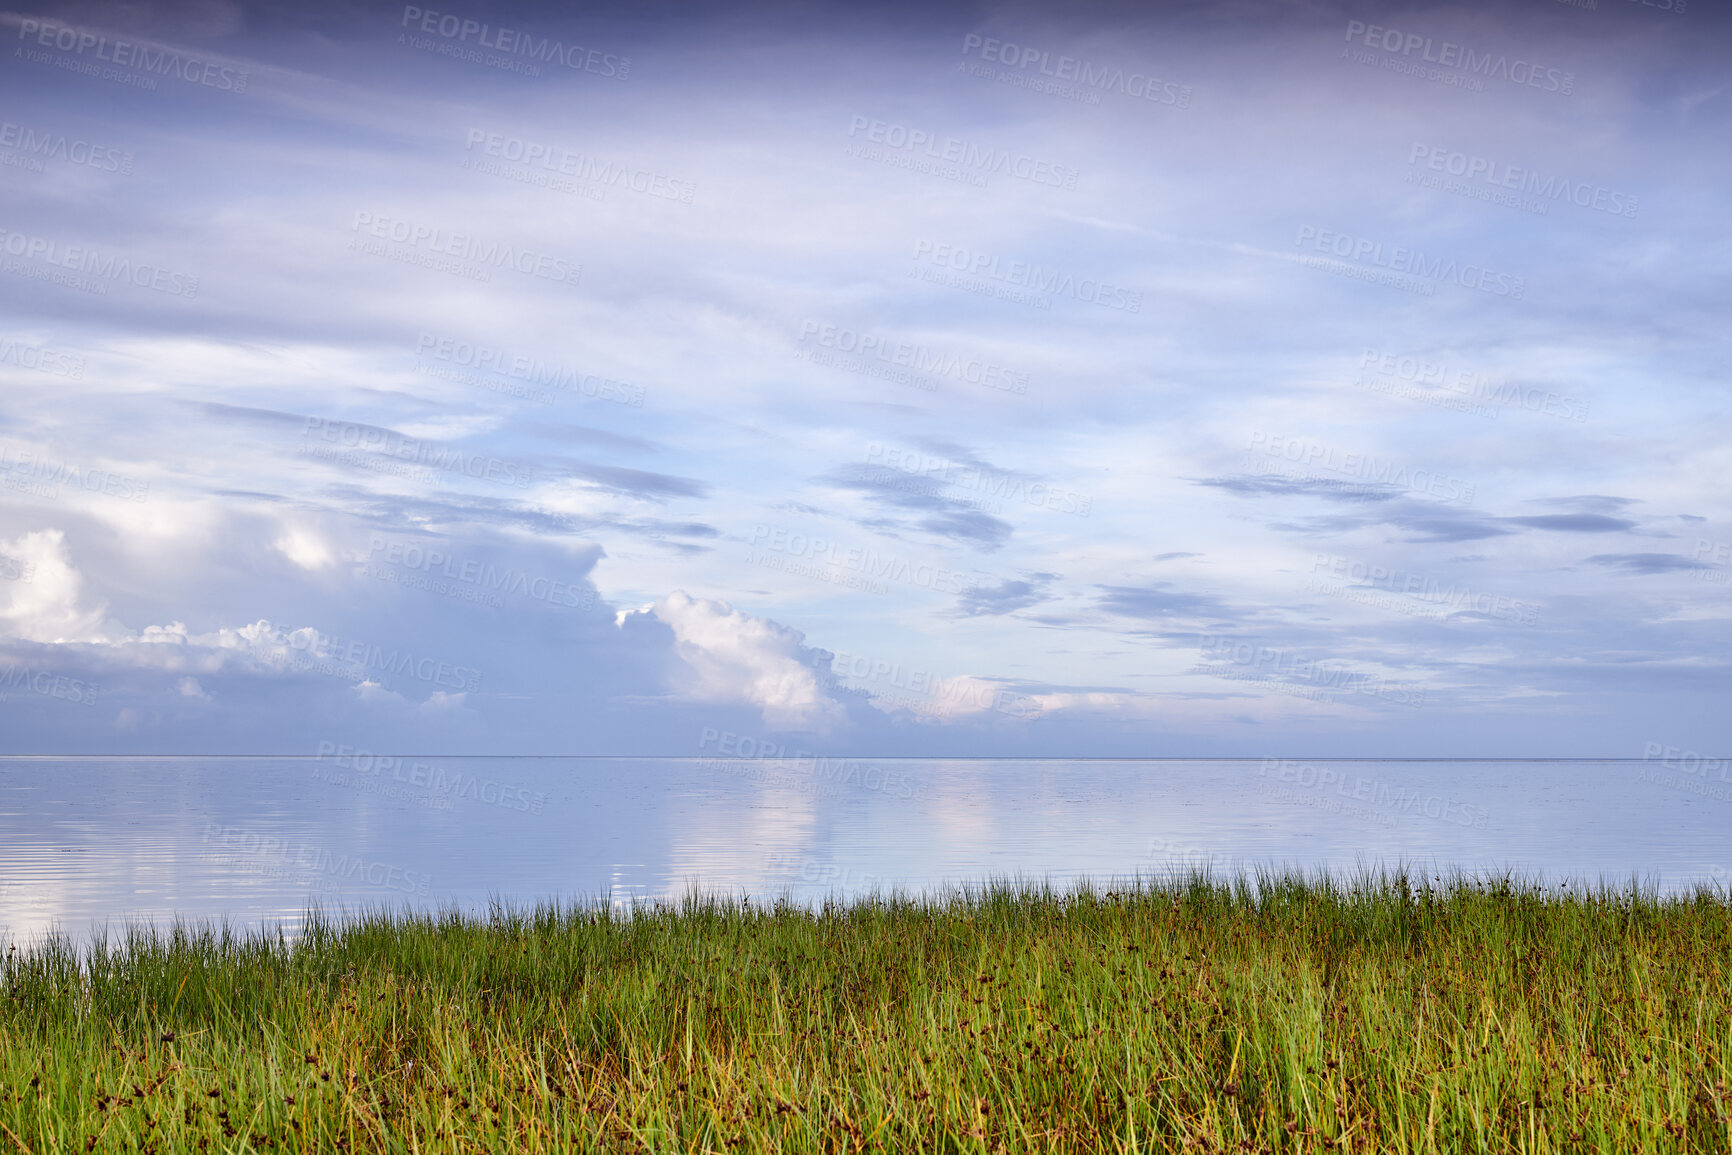 Buy stock photo Copy space, sea and ocean view with green, long and lush grass or reeds on a quiet beach, lake or bay. Relaxing, calm and peaceful remote seascape with blue sky, clouds and water on a secluded island